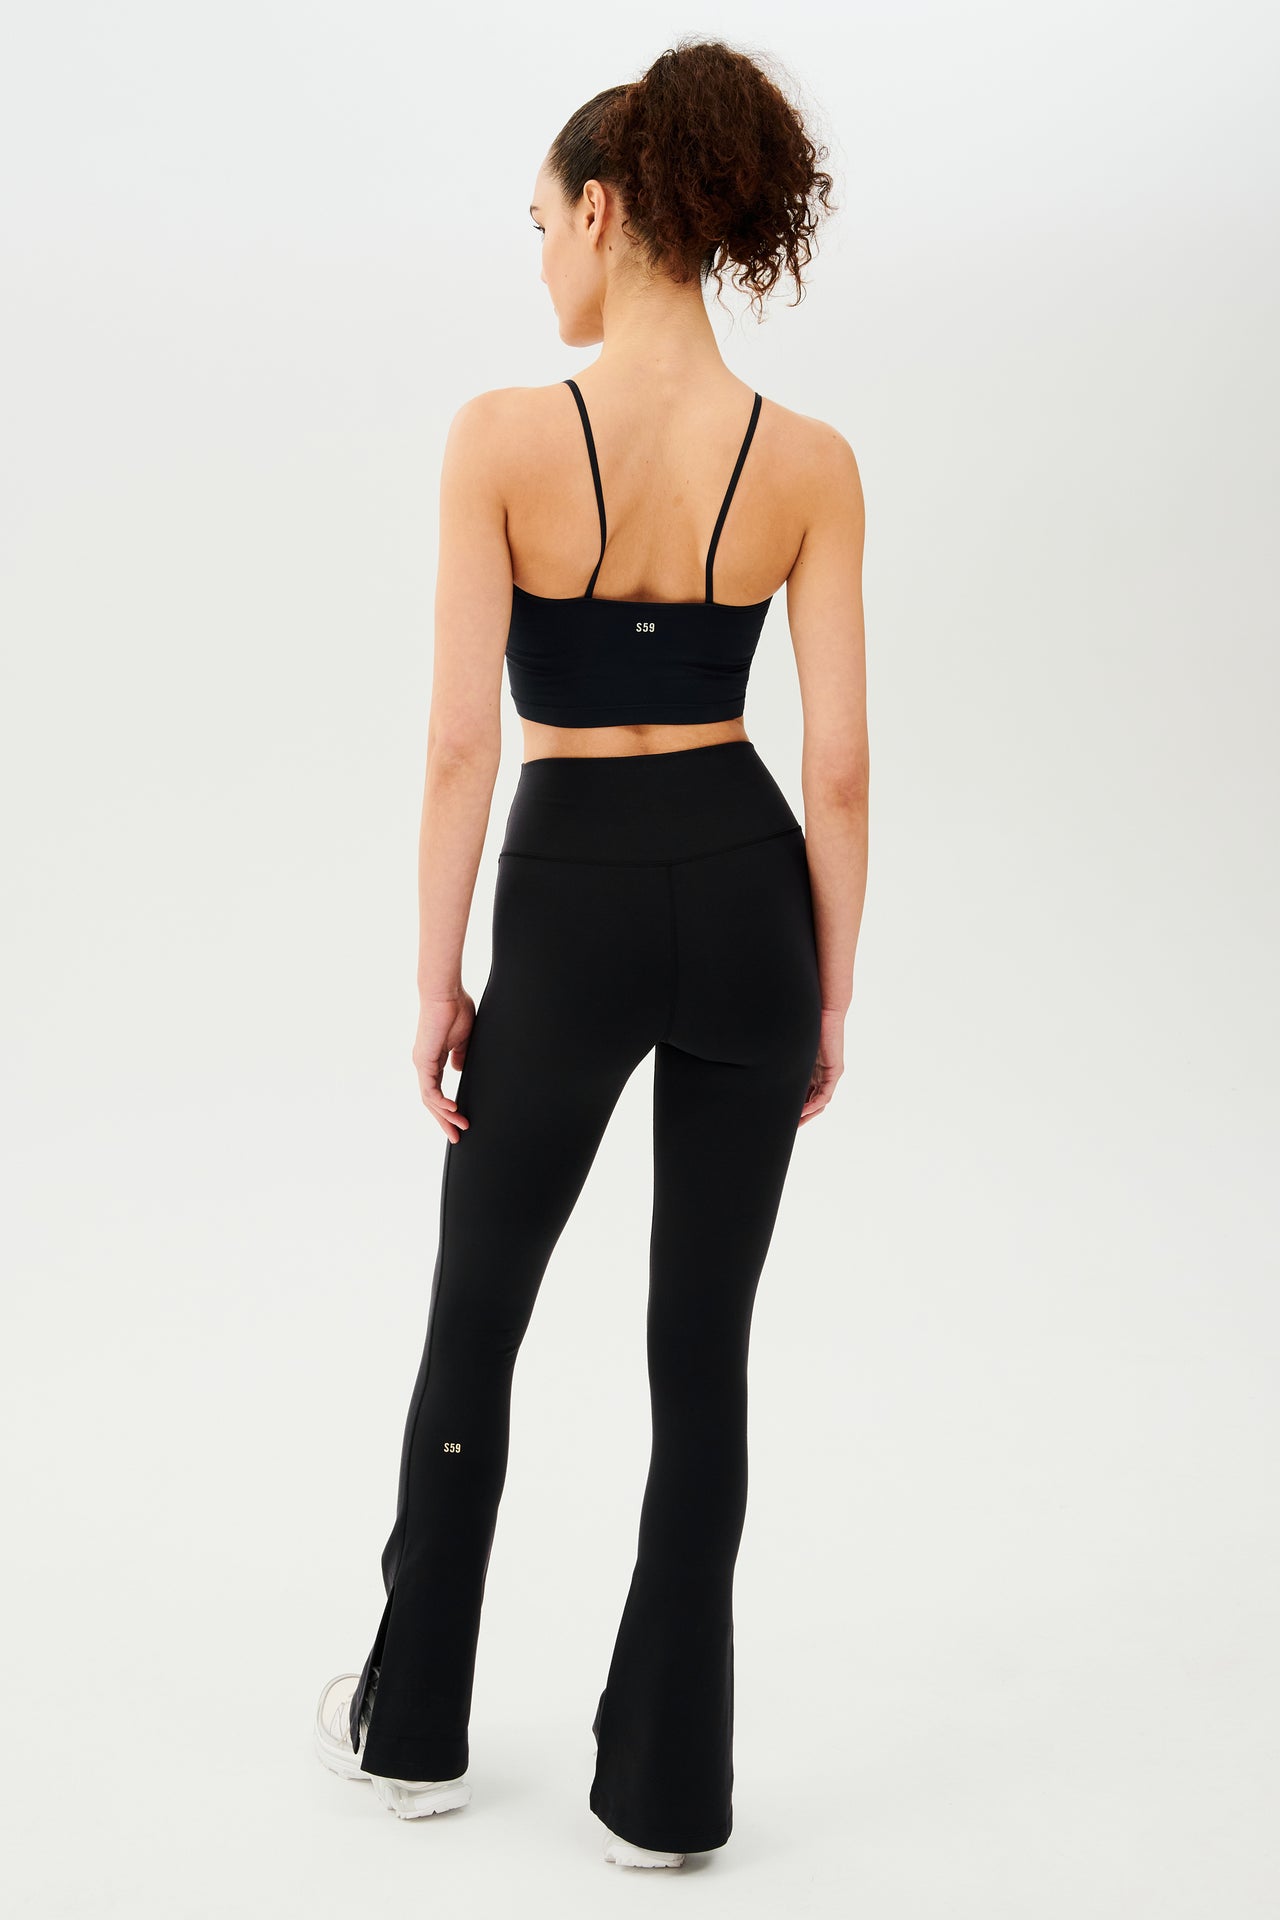 The back view of a woman in Splits59 black leggings and a Loren Seamless Cami - Black.